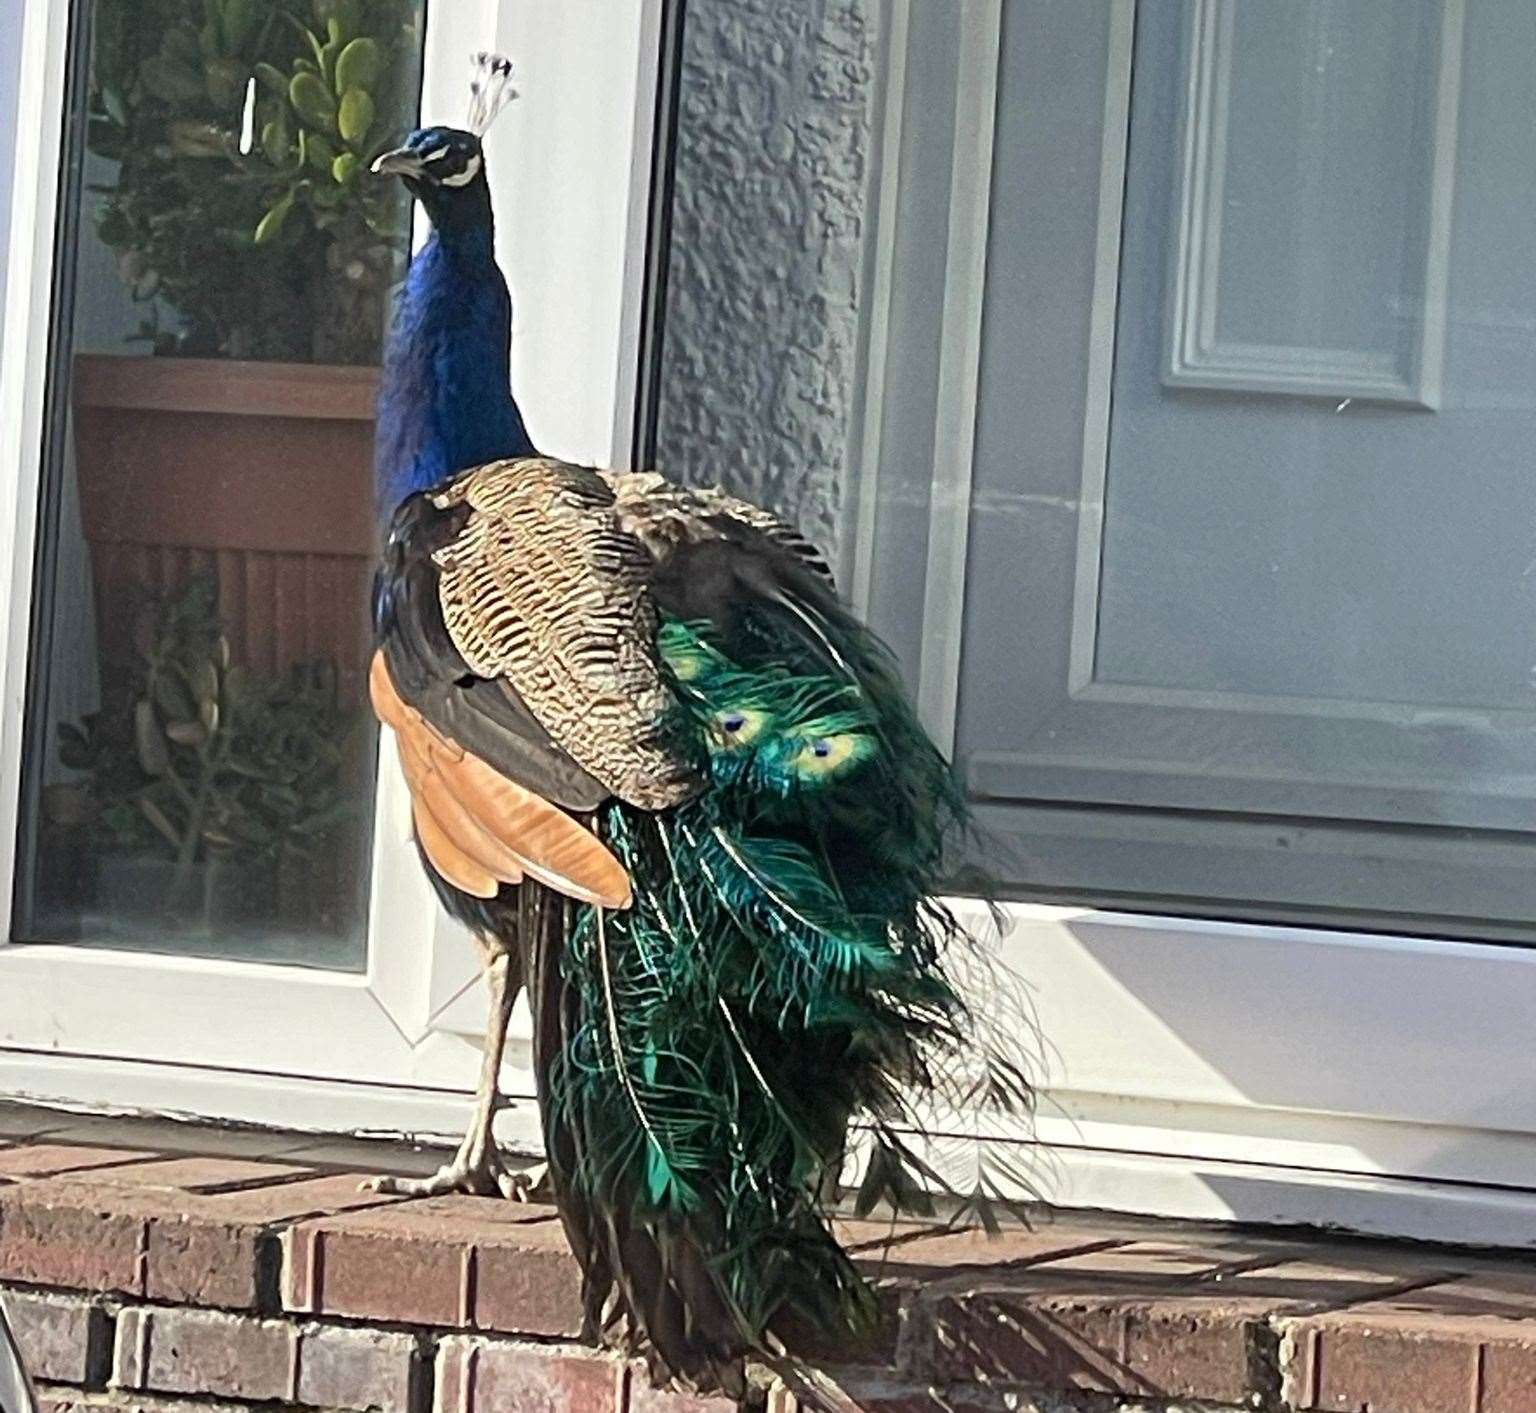 The peacock on the loose in Gravesend. Picture: Martin Jordan